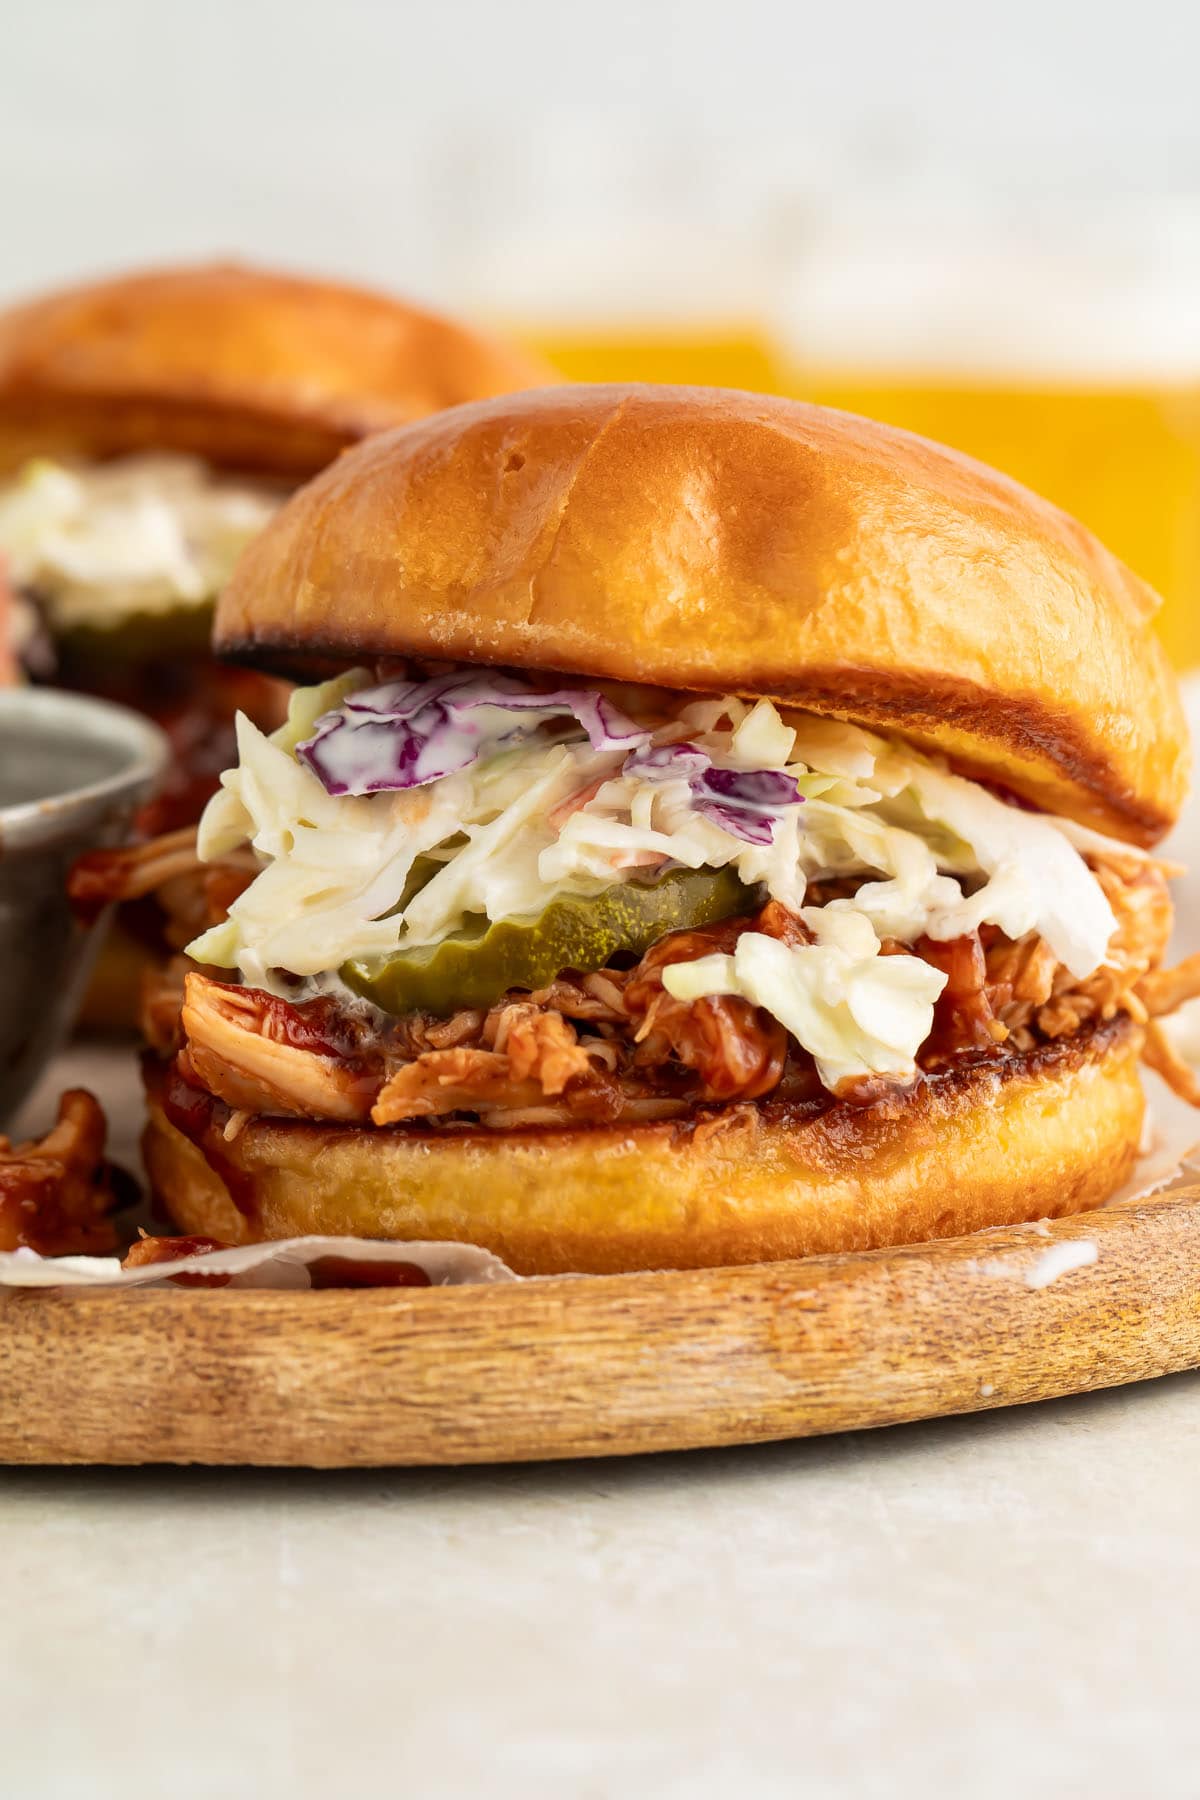 Crockpot-cooked pulled BBQ chicken on a sandwich bun with pickle chips and coleslaw.